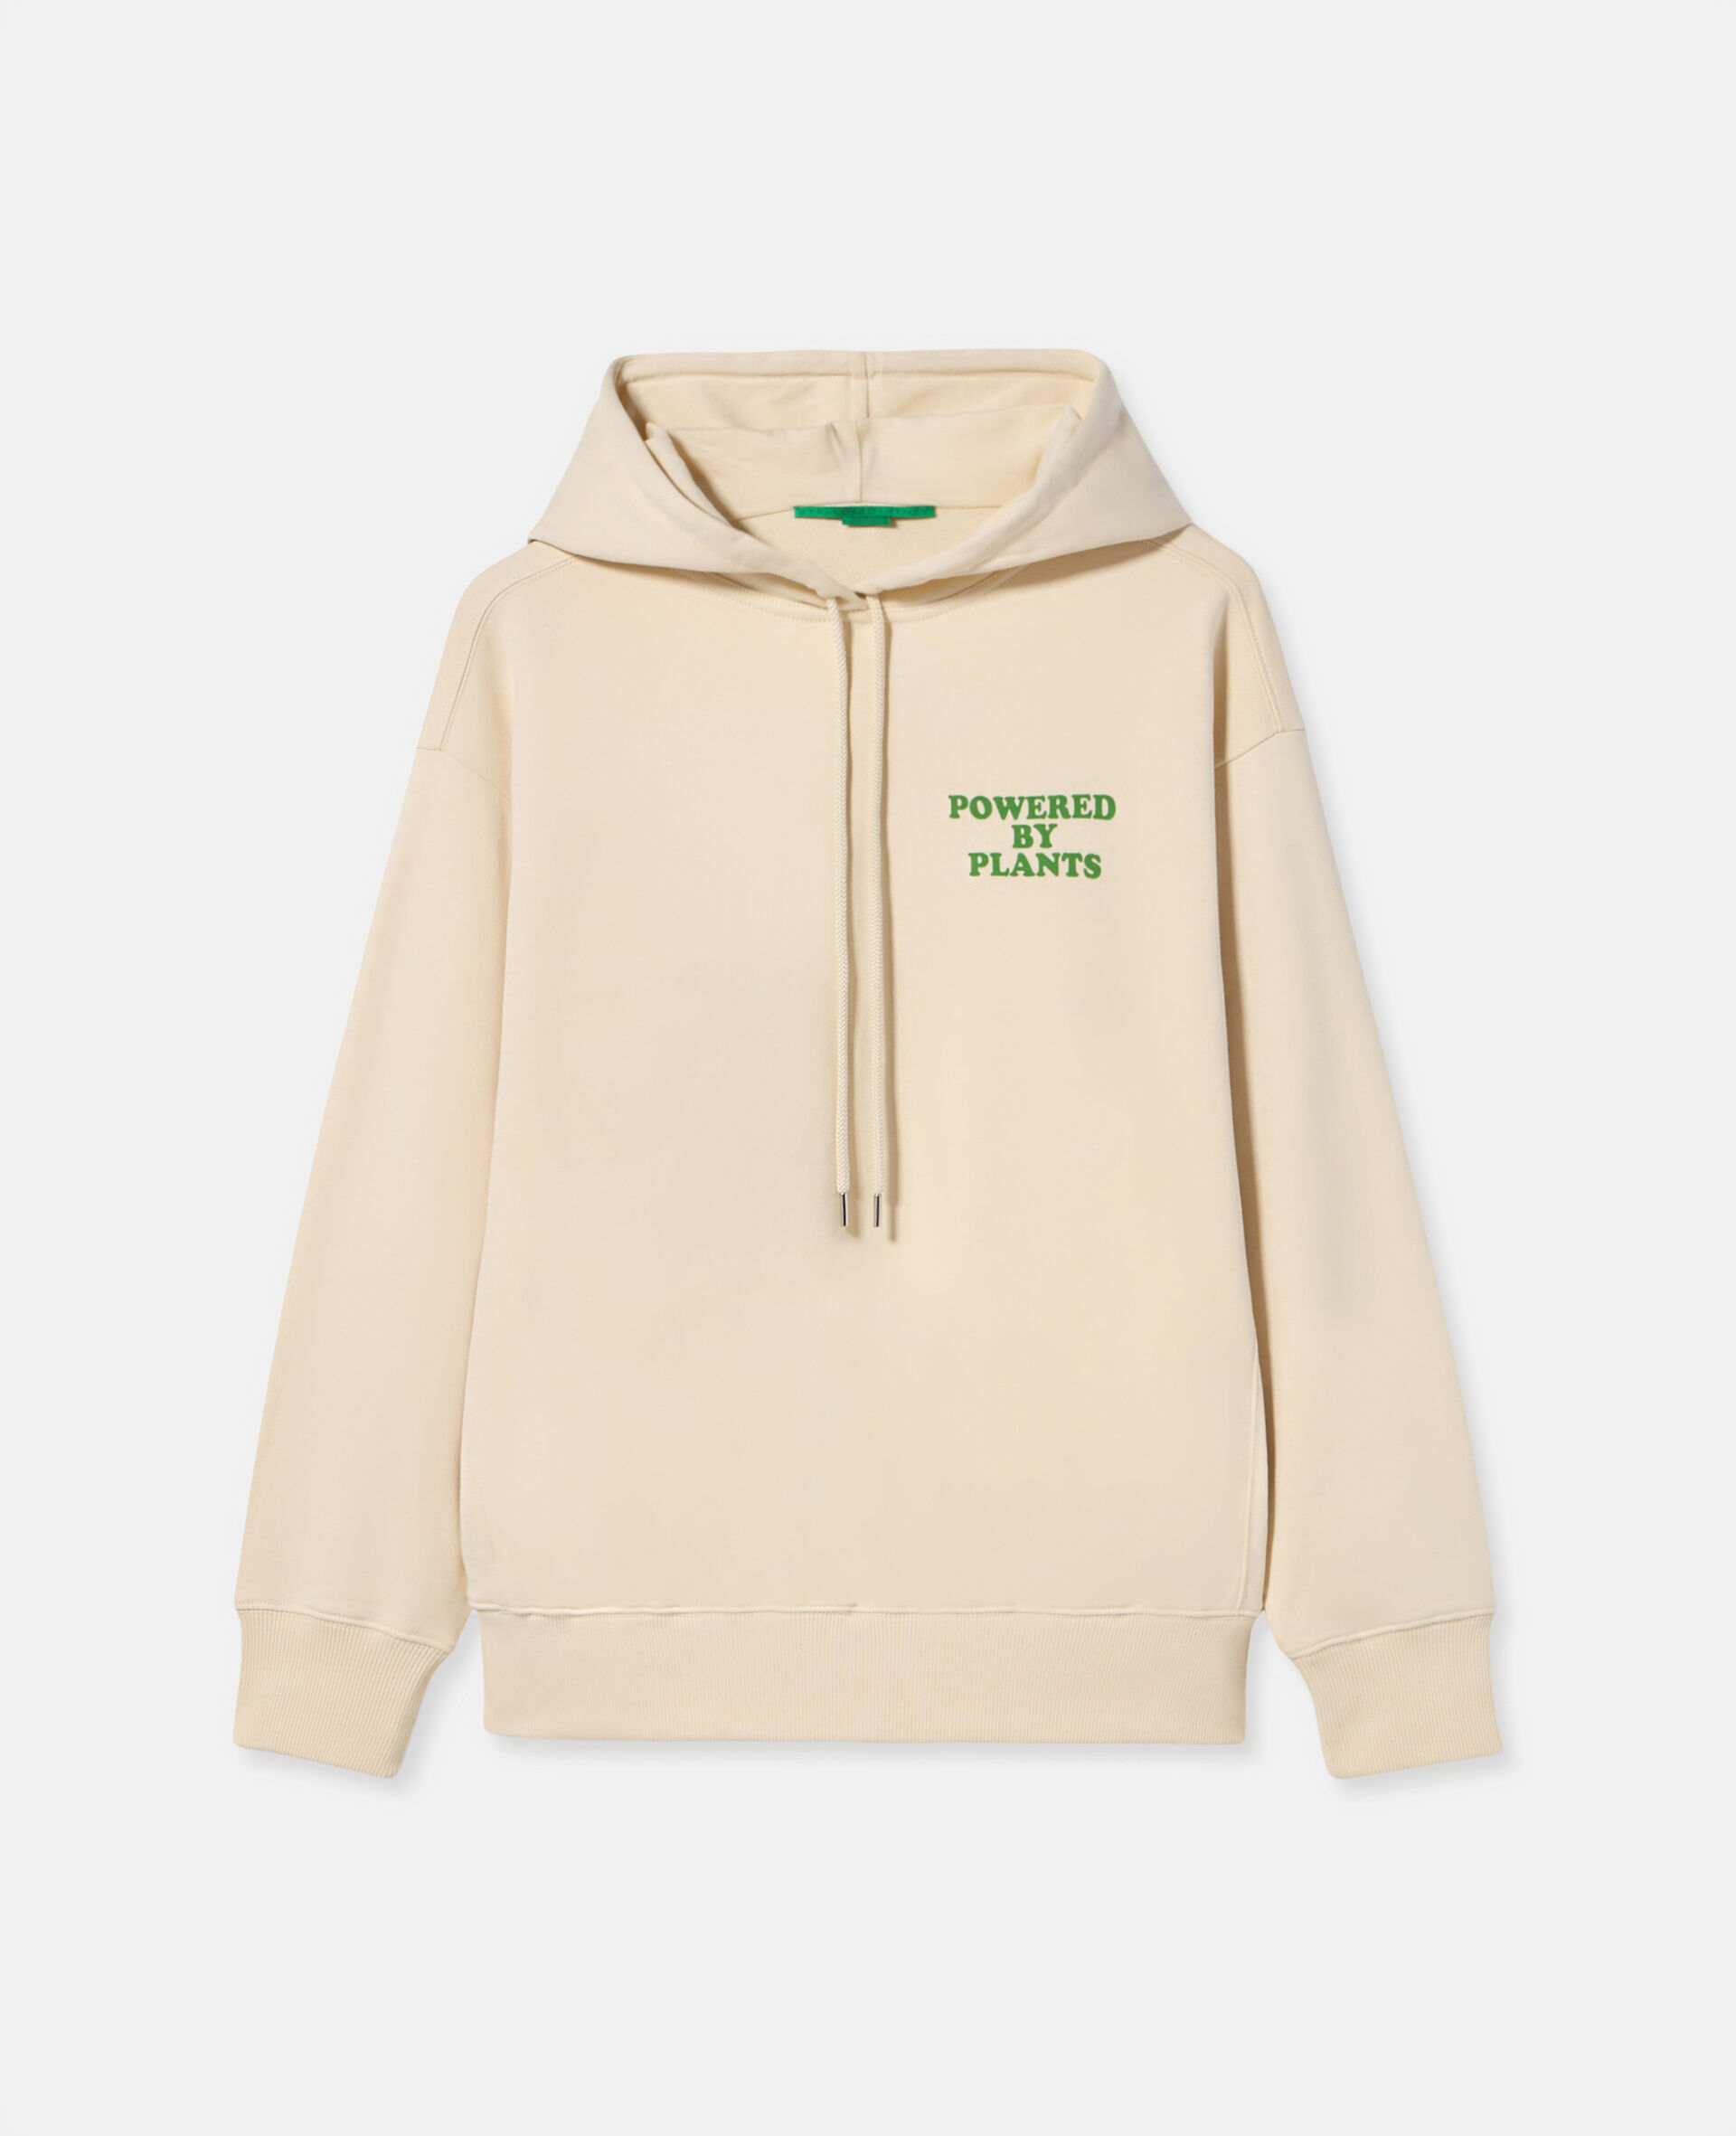 'Powered By Plants' Graphic Hoodie-Cream-model